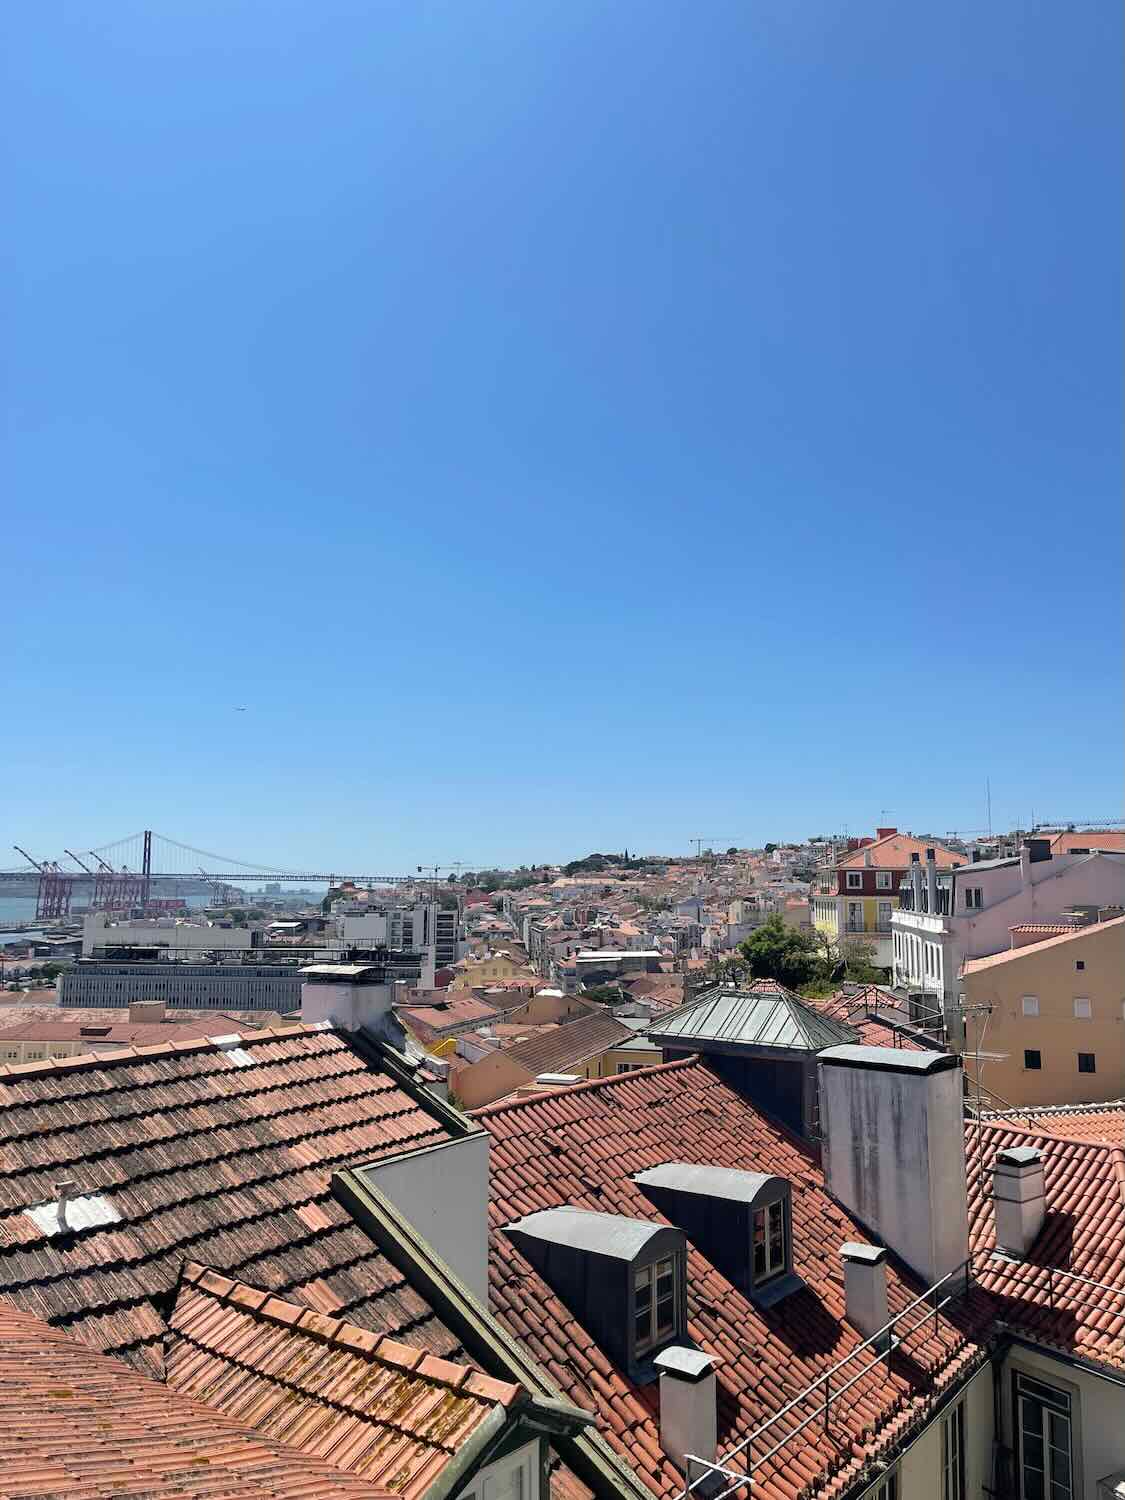 A rooftop view over Lisbon's terracotta roofs, with the 25 de Abril Bridge in the distance, under a clear blue sky, showcasing the city's topography.